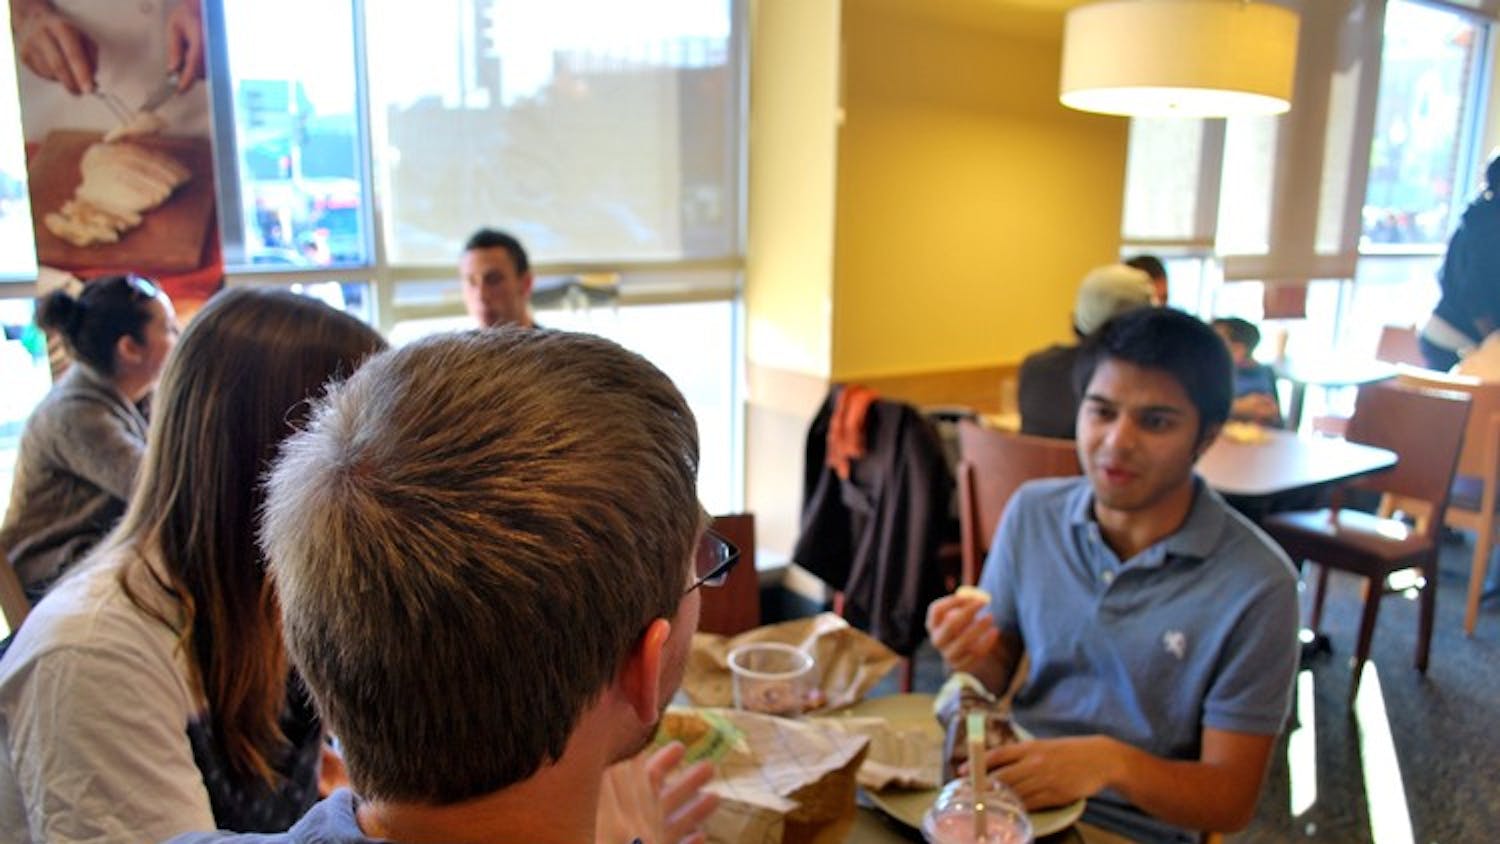 Students enjoy their favorite sandwiches at the new Panera Bread store in Tenleytown.